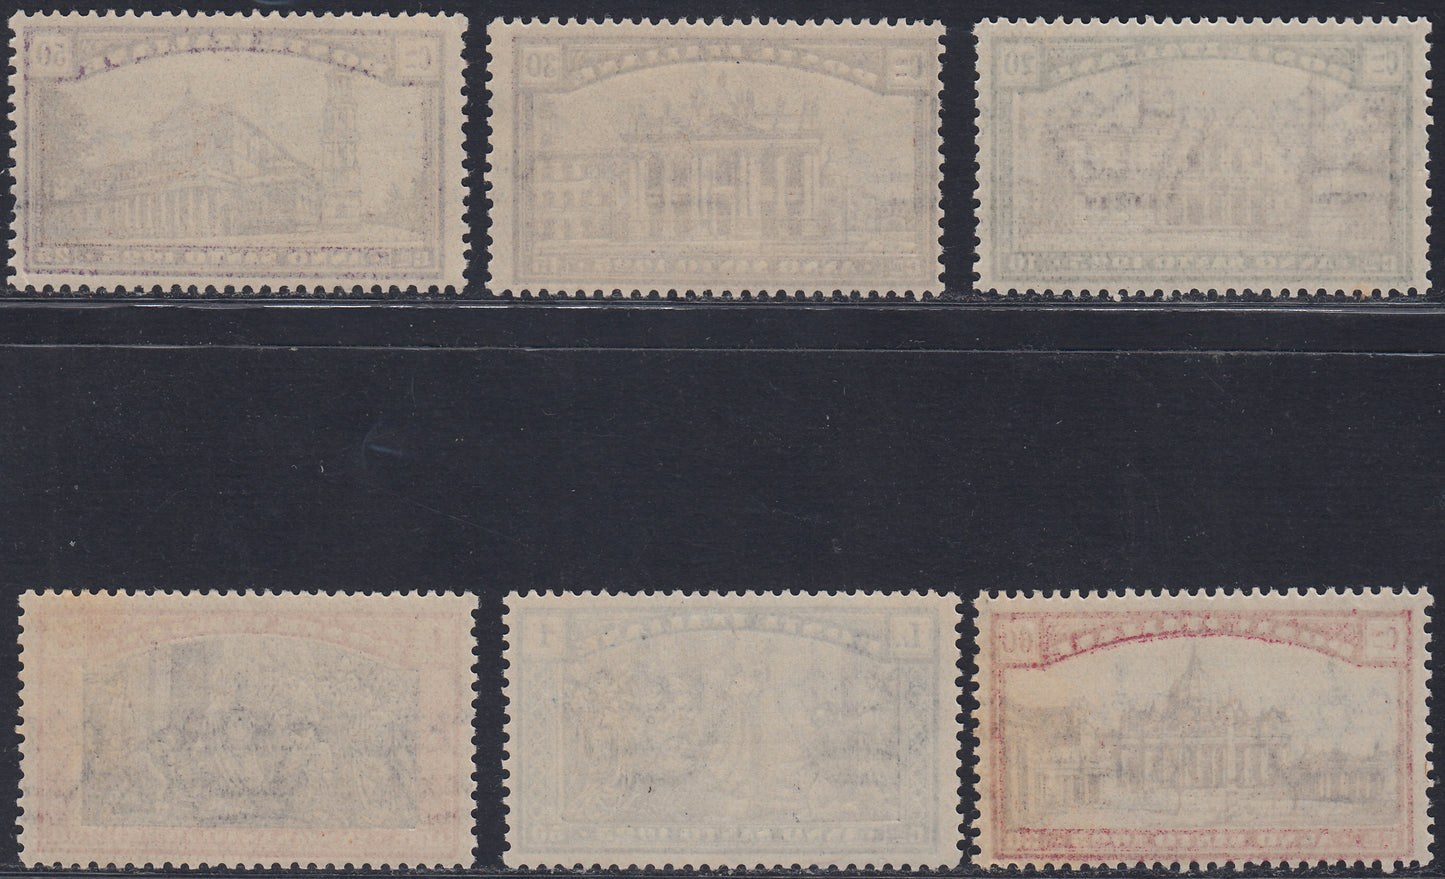 RN208 - 1924 - Holy Year 1925 complete set of six new intact values ​​(169/174). 